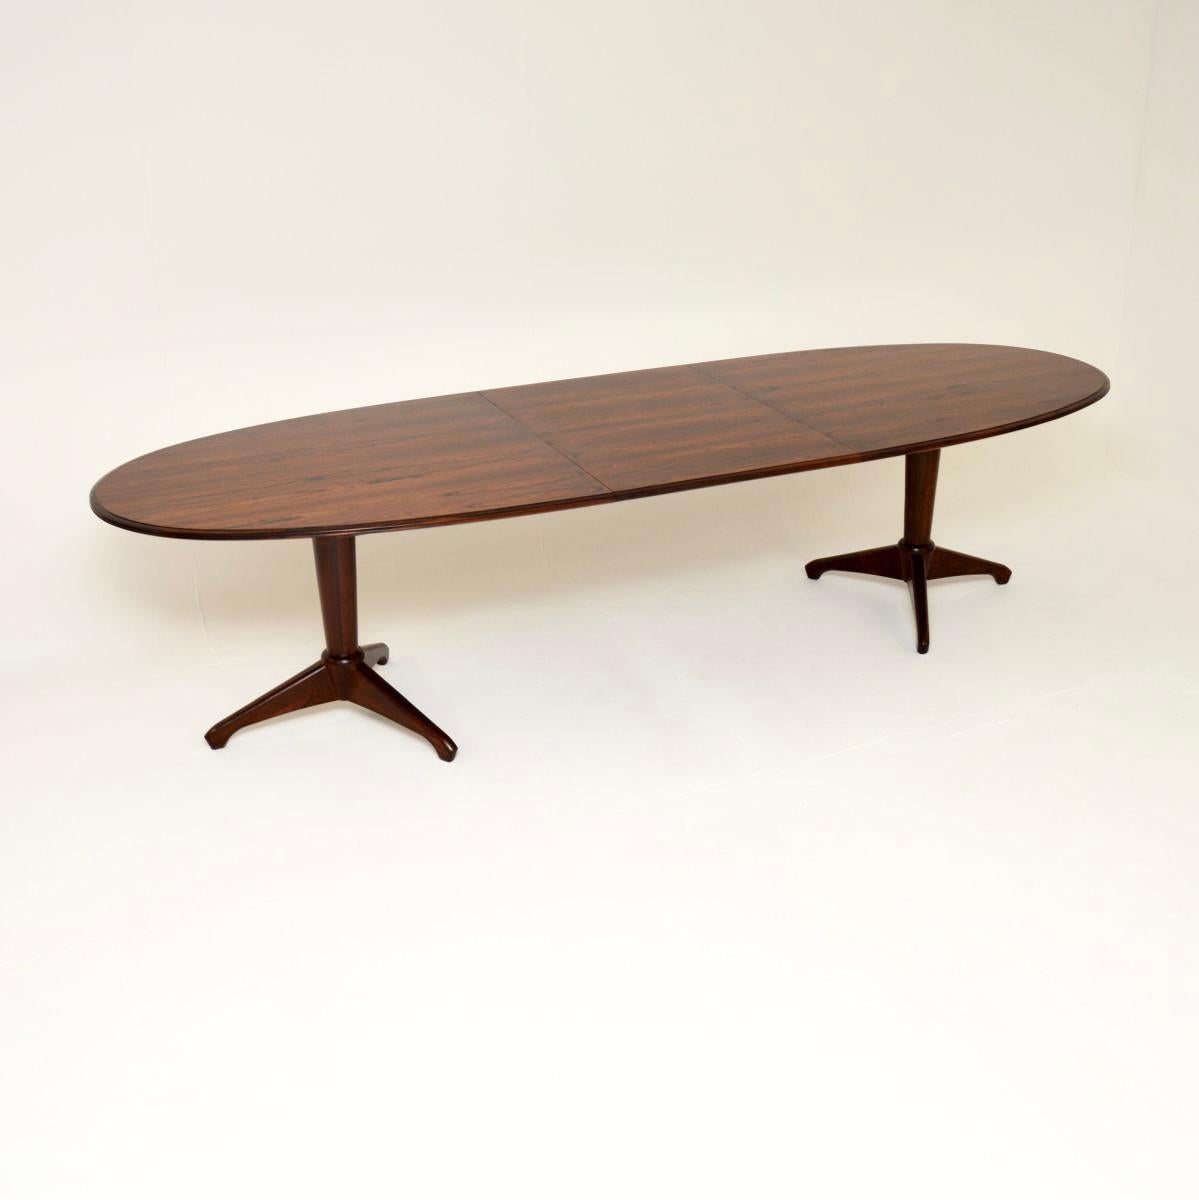 A stunning and very rare vintage extending dining table by Andrew Milne for Heal’s. This was made in England, it dates from the 1950’s.

This model was designed exclusively for Heal’s in the 1940’s, it is of absolutely superb quality. The large oval